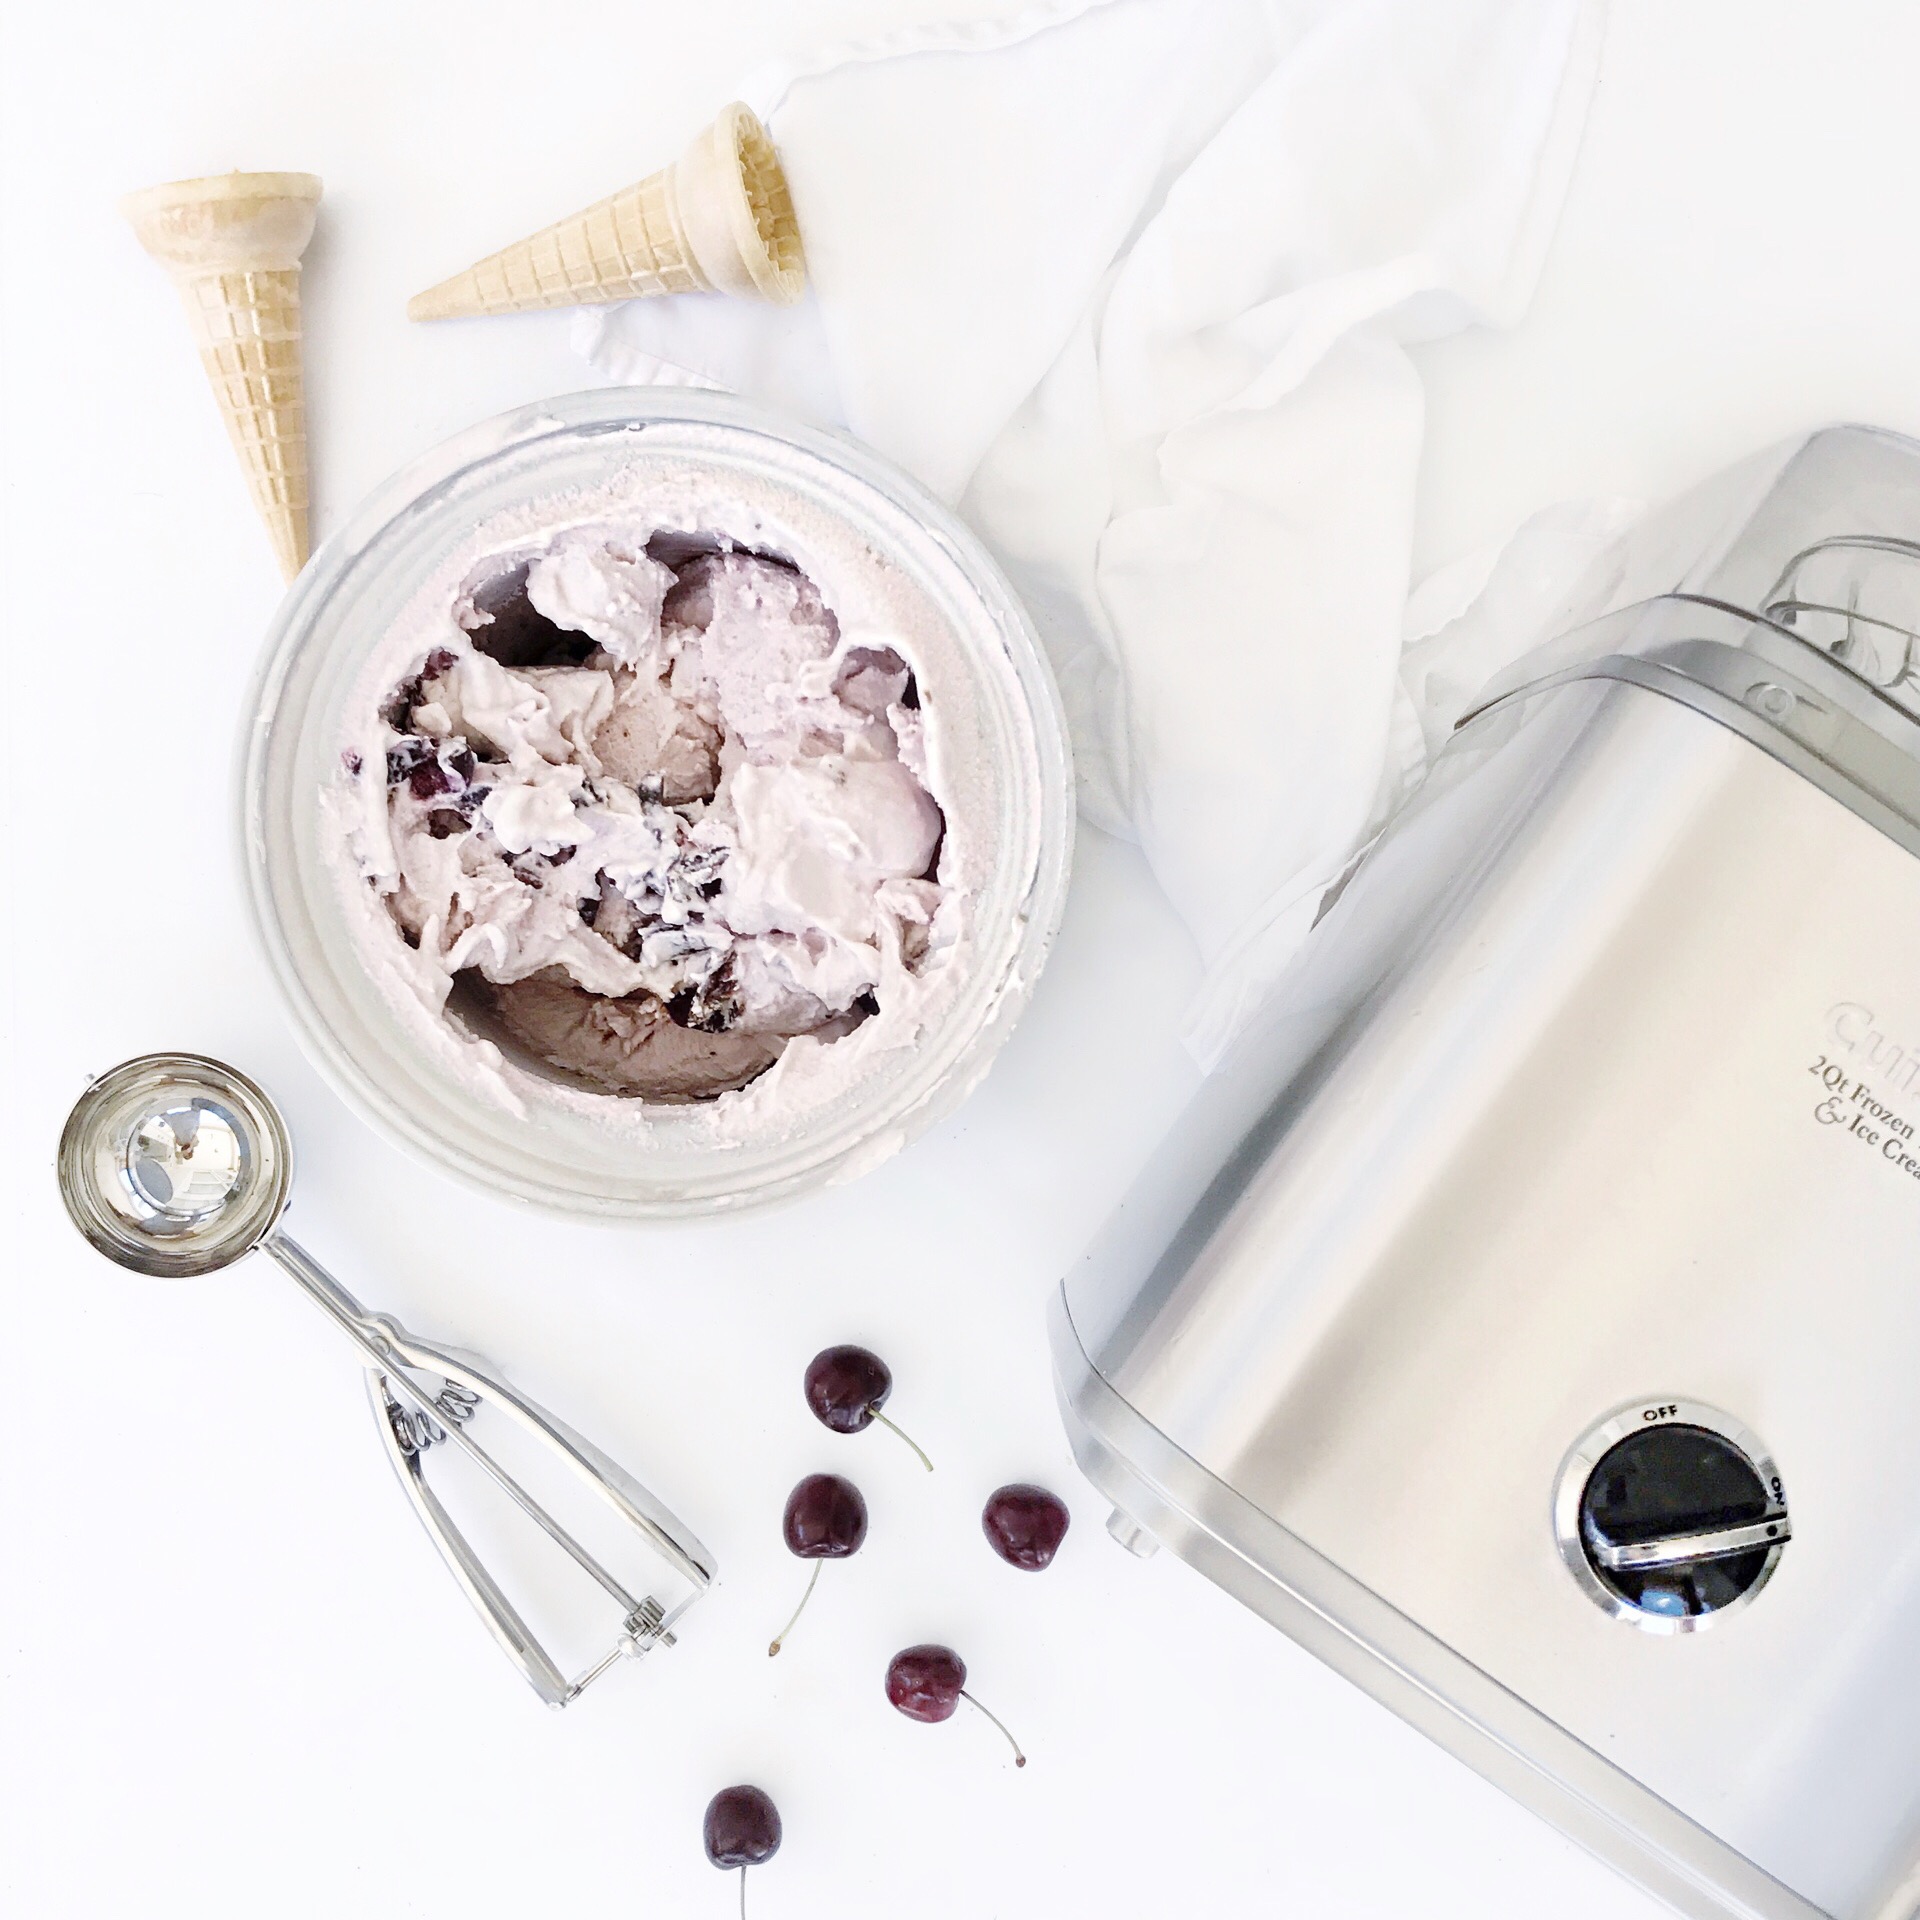 Homemade Cherry Vanilla Ice Cream made with simple ingredients by Tori Wesszer from Fraîche Nutrition and whipped up in a Cuisinart ice cream maker.